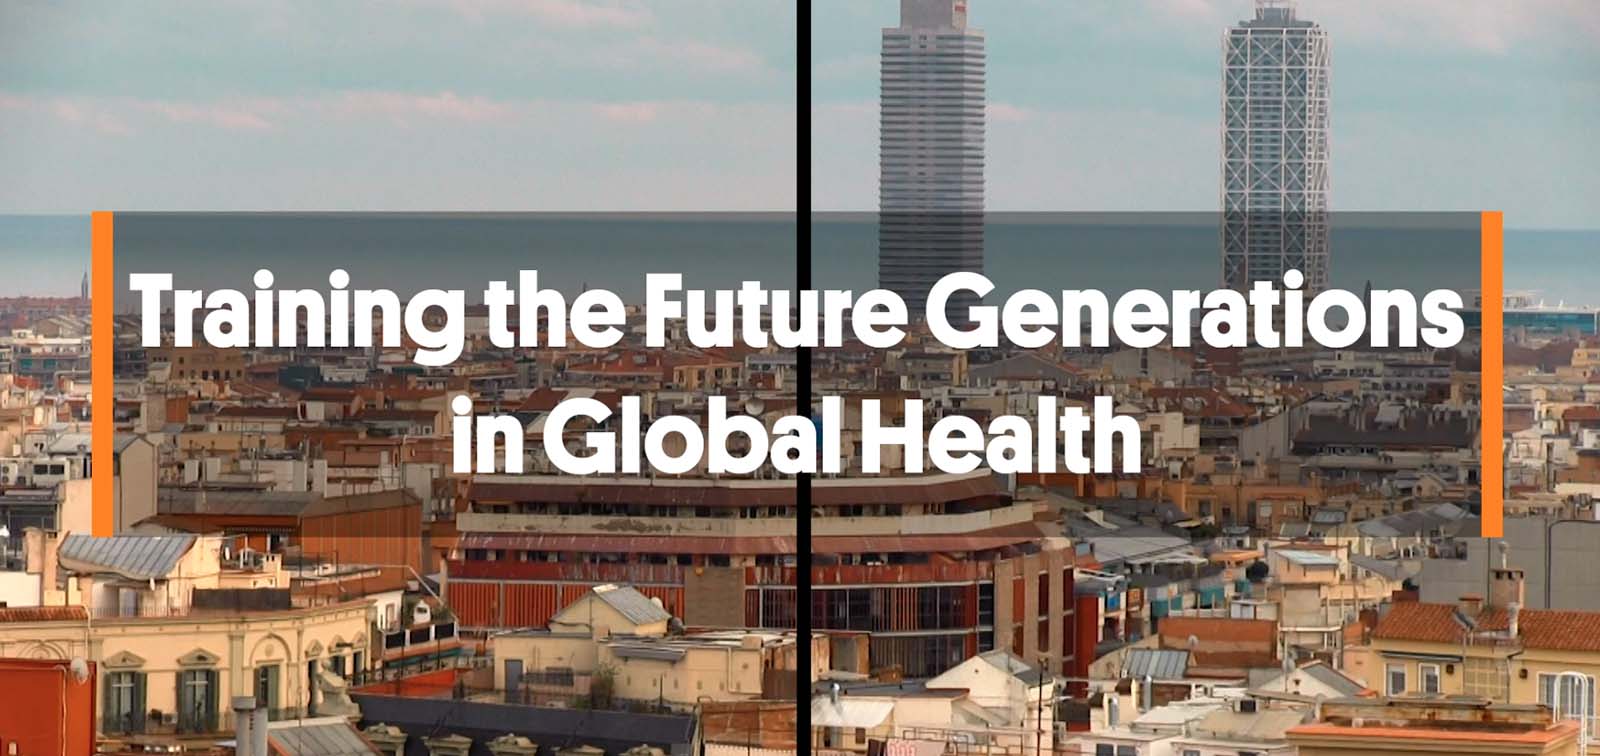 Training the future generations in global health